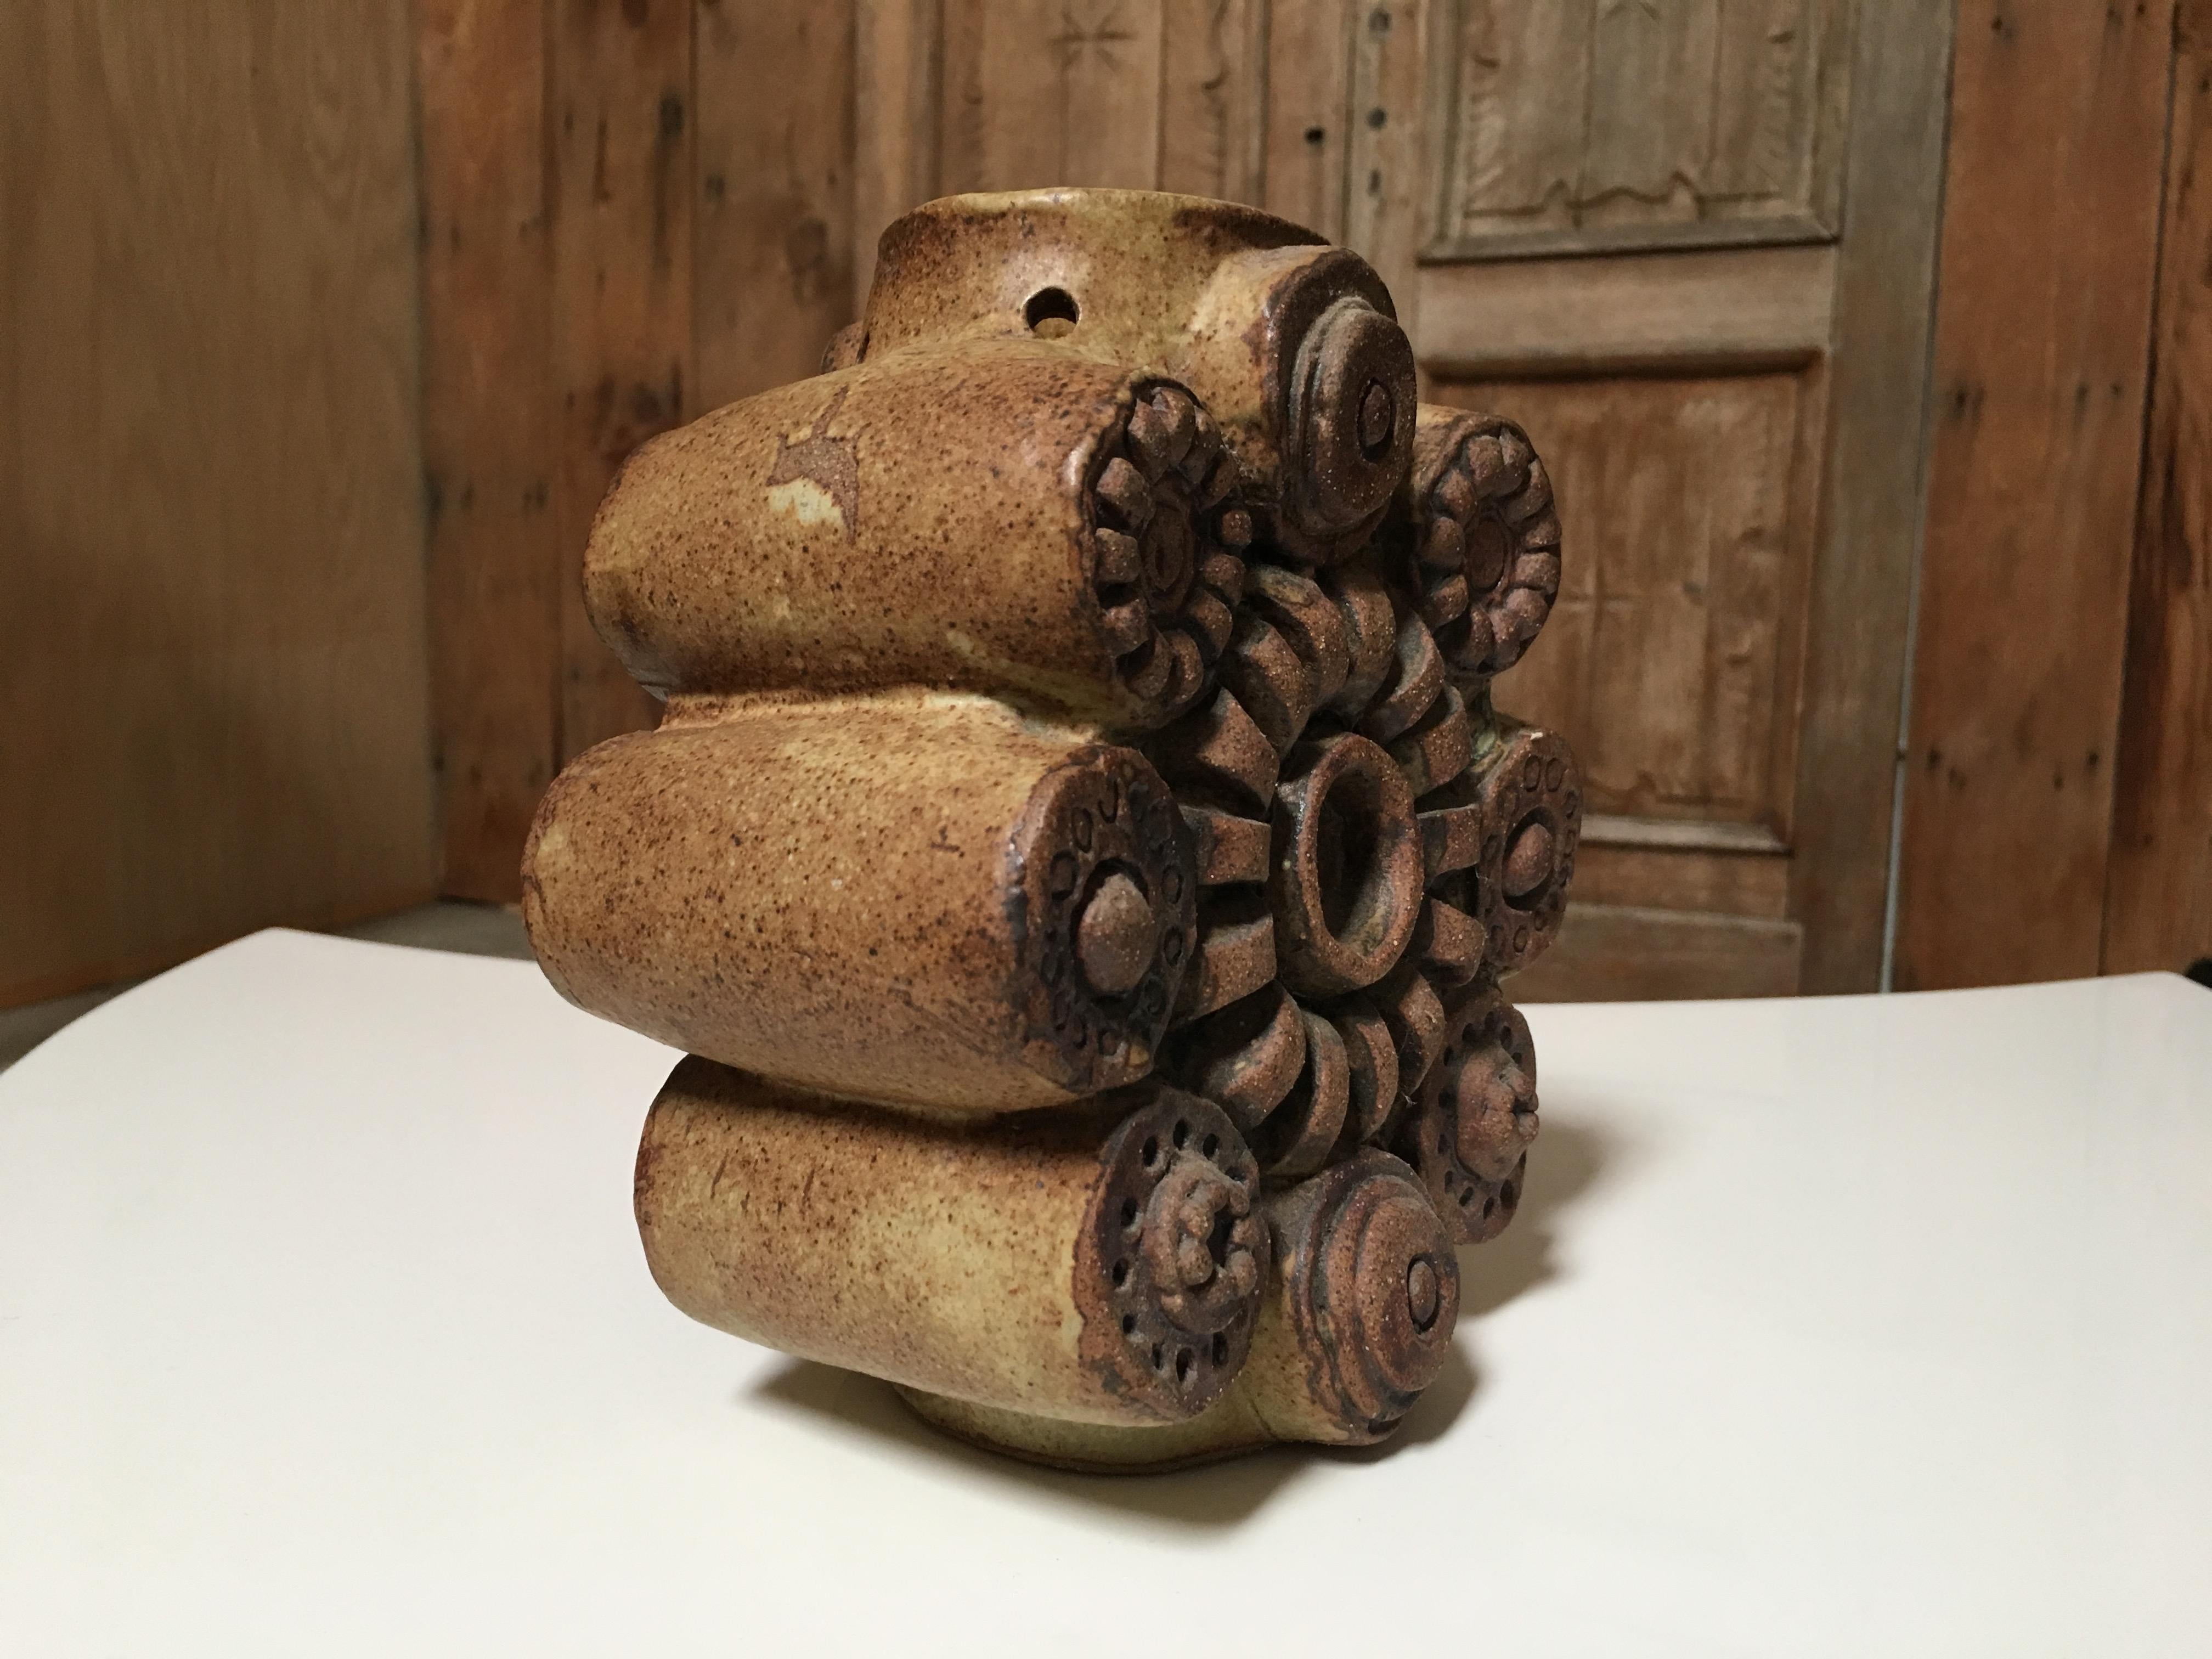 Vintage stoneware vase.

In 1960 he set up his own workshop in Forest Hill, London, Progressive designs were readily accepted in London at that time, and Rooke applied his efforts to making pieces of a sculptural nature. The early pieces were